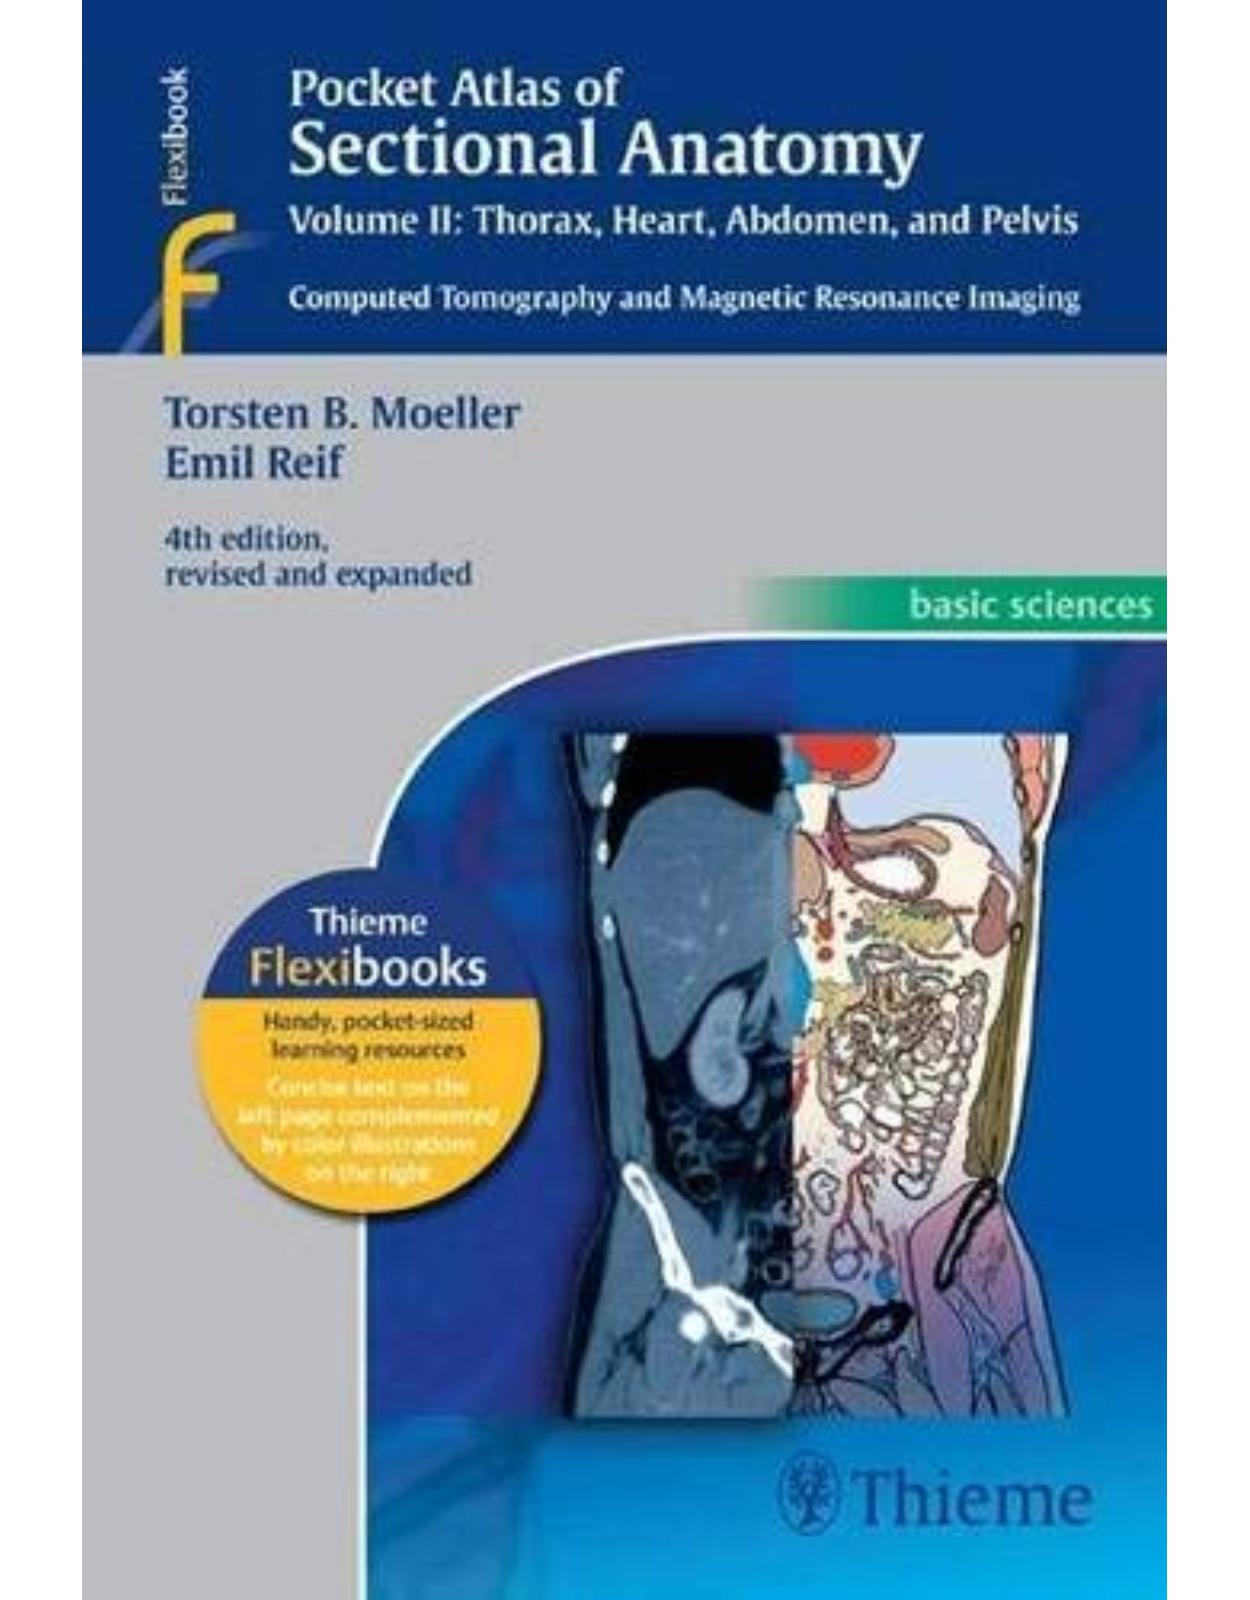 Pocket Atlas of Sectional Anatomy, Vol. II: Thorax, Heart, Abdomen and Pelvis. Computed Tomography and Magnetic Resonance Imaging 